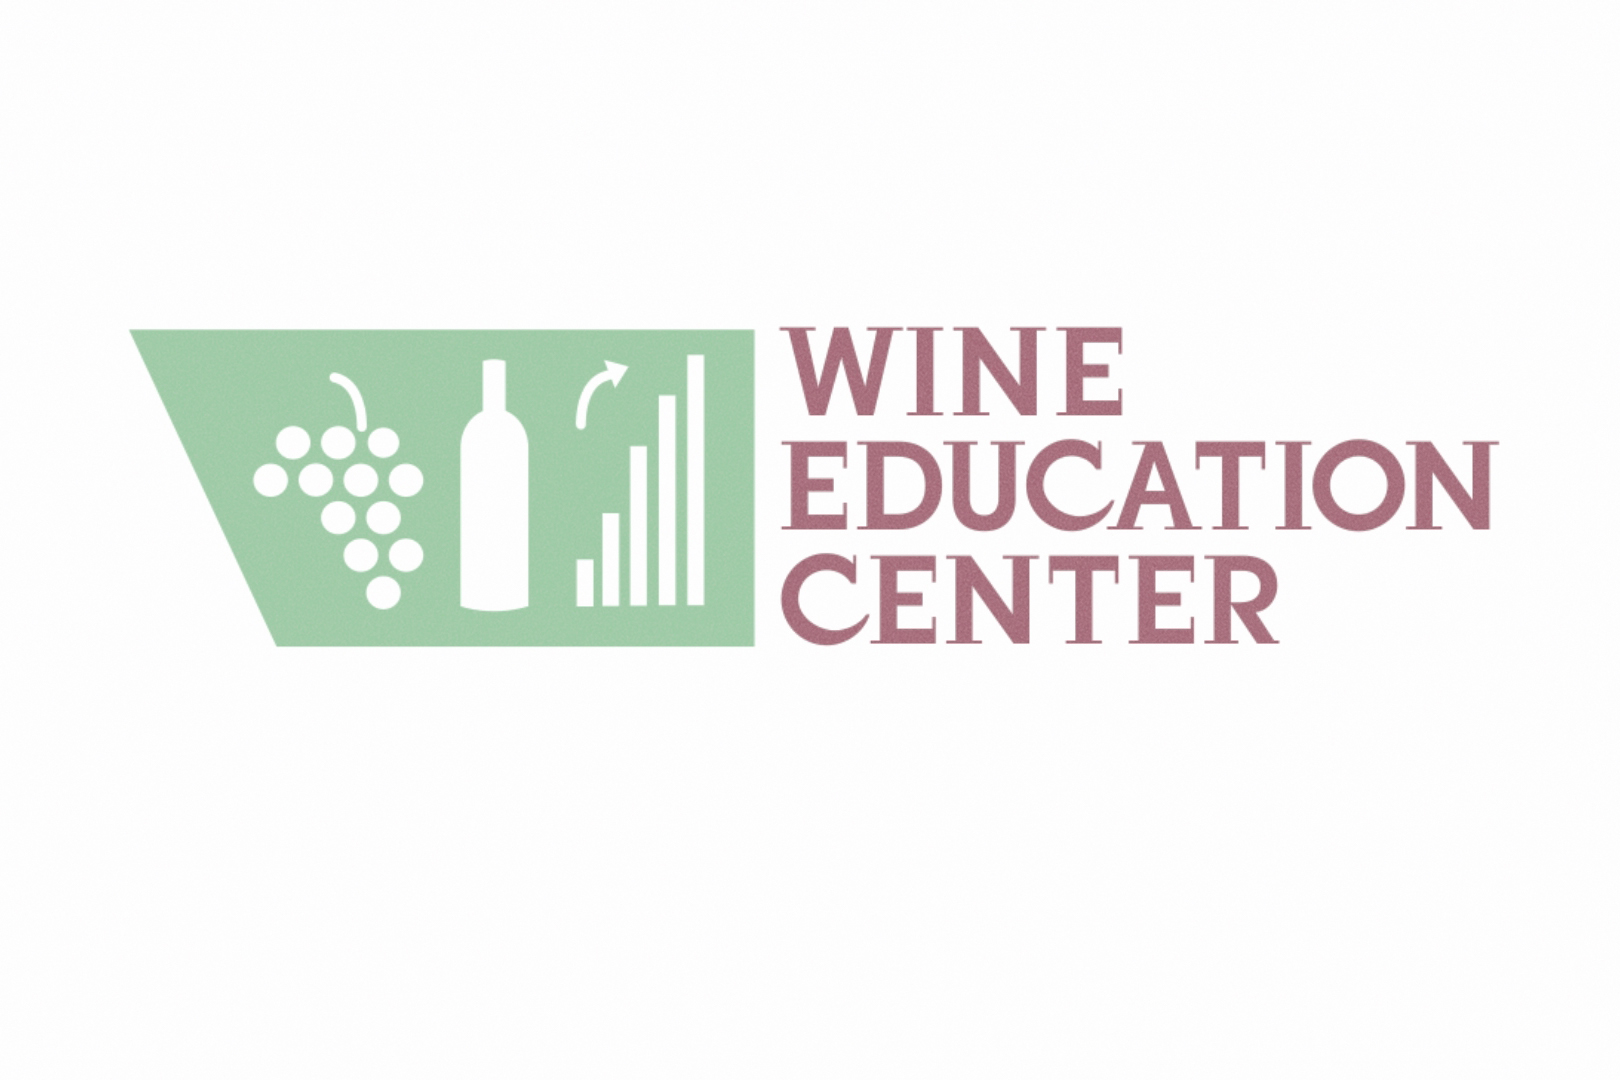 The Wine Education Center